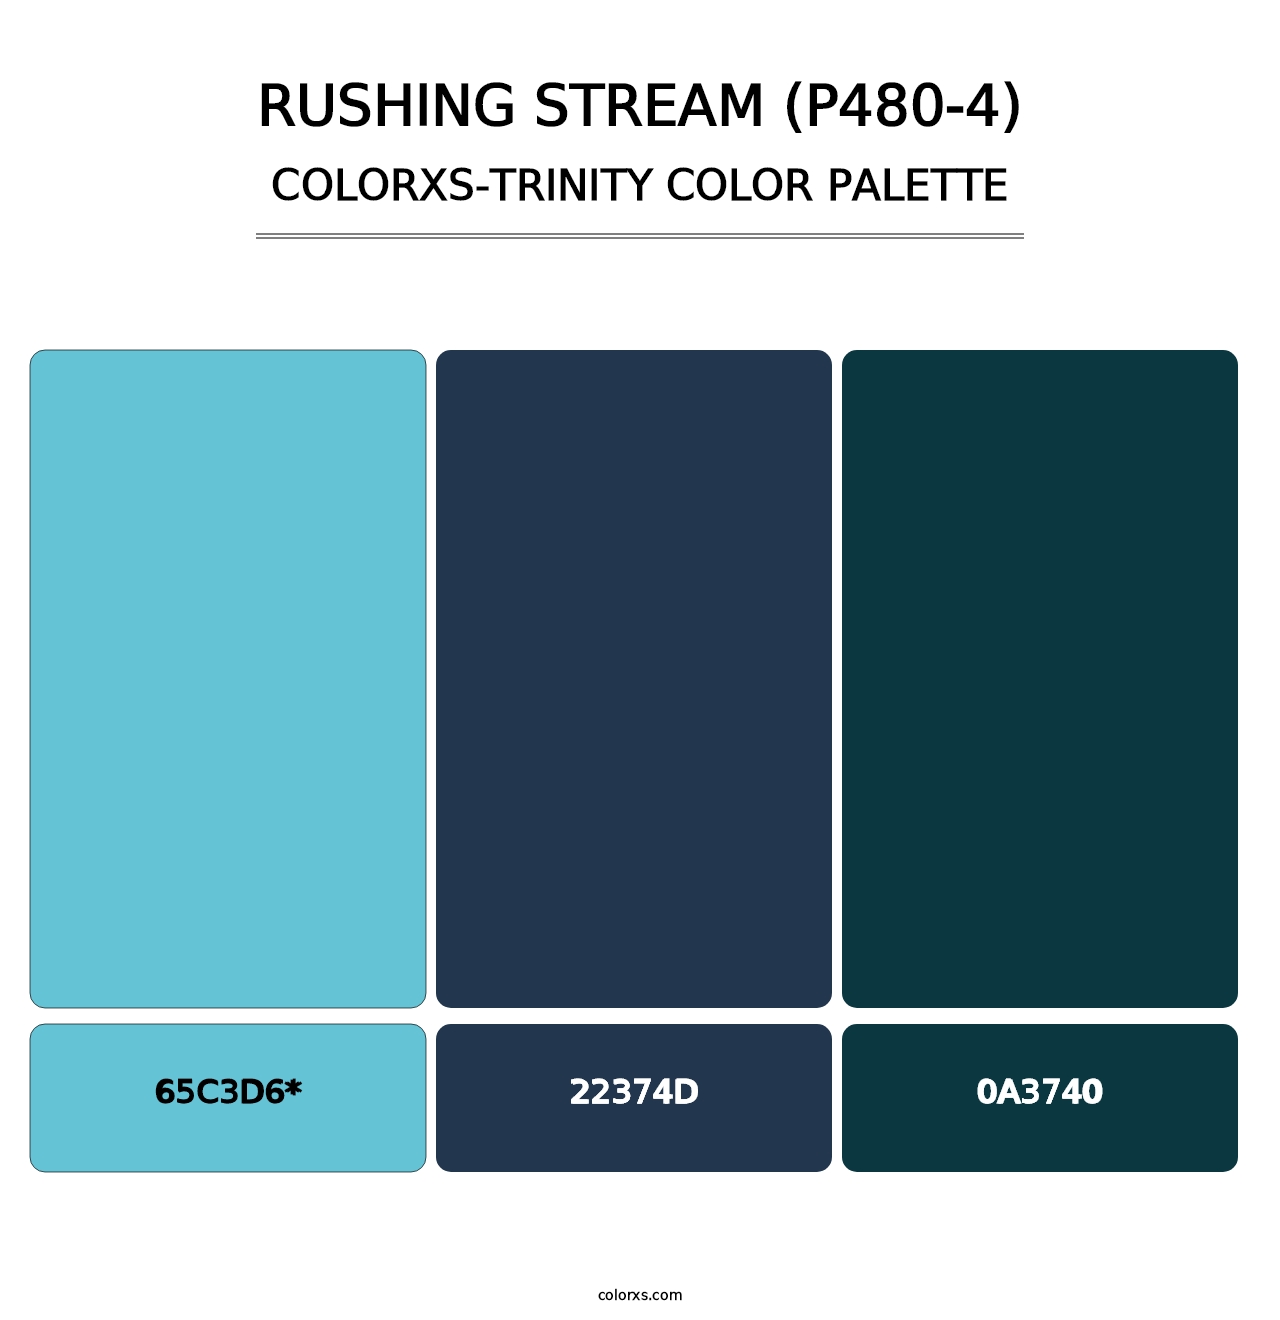 Rushing Stream (P480-4) - Colorxs Trinity Palette